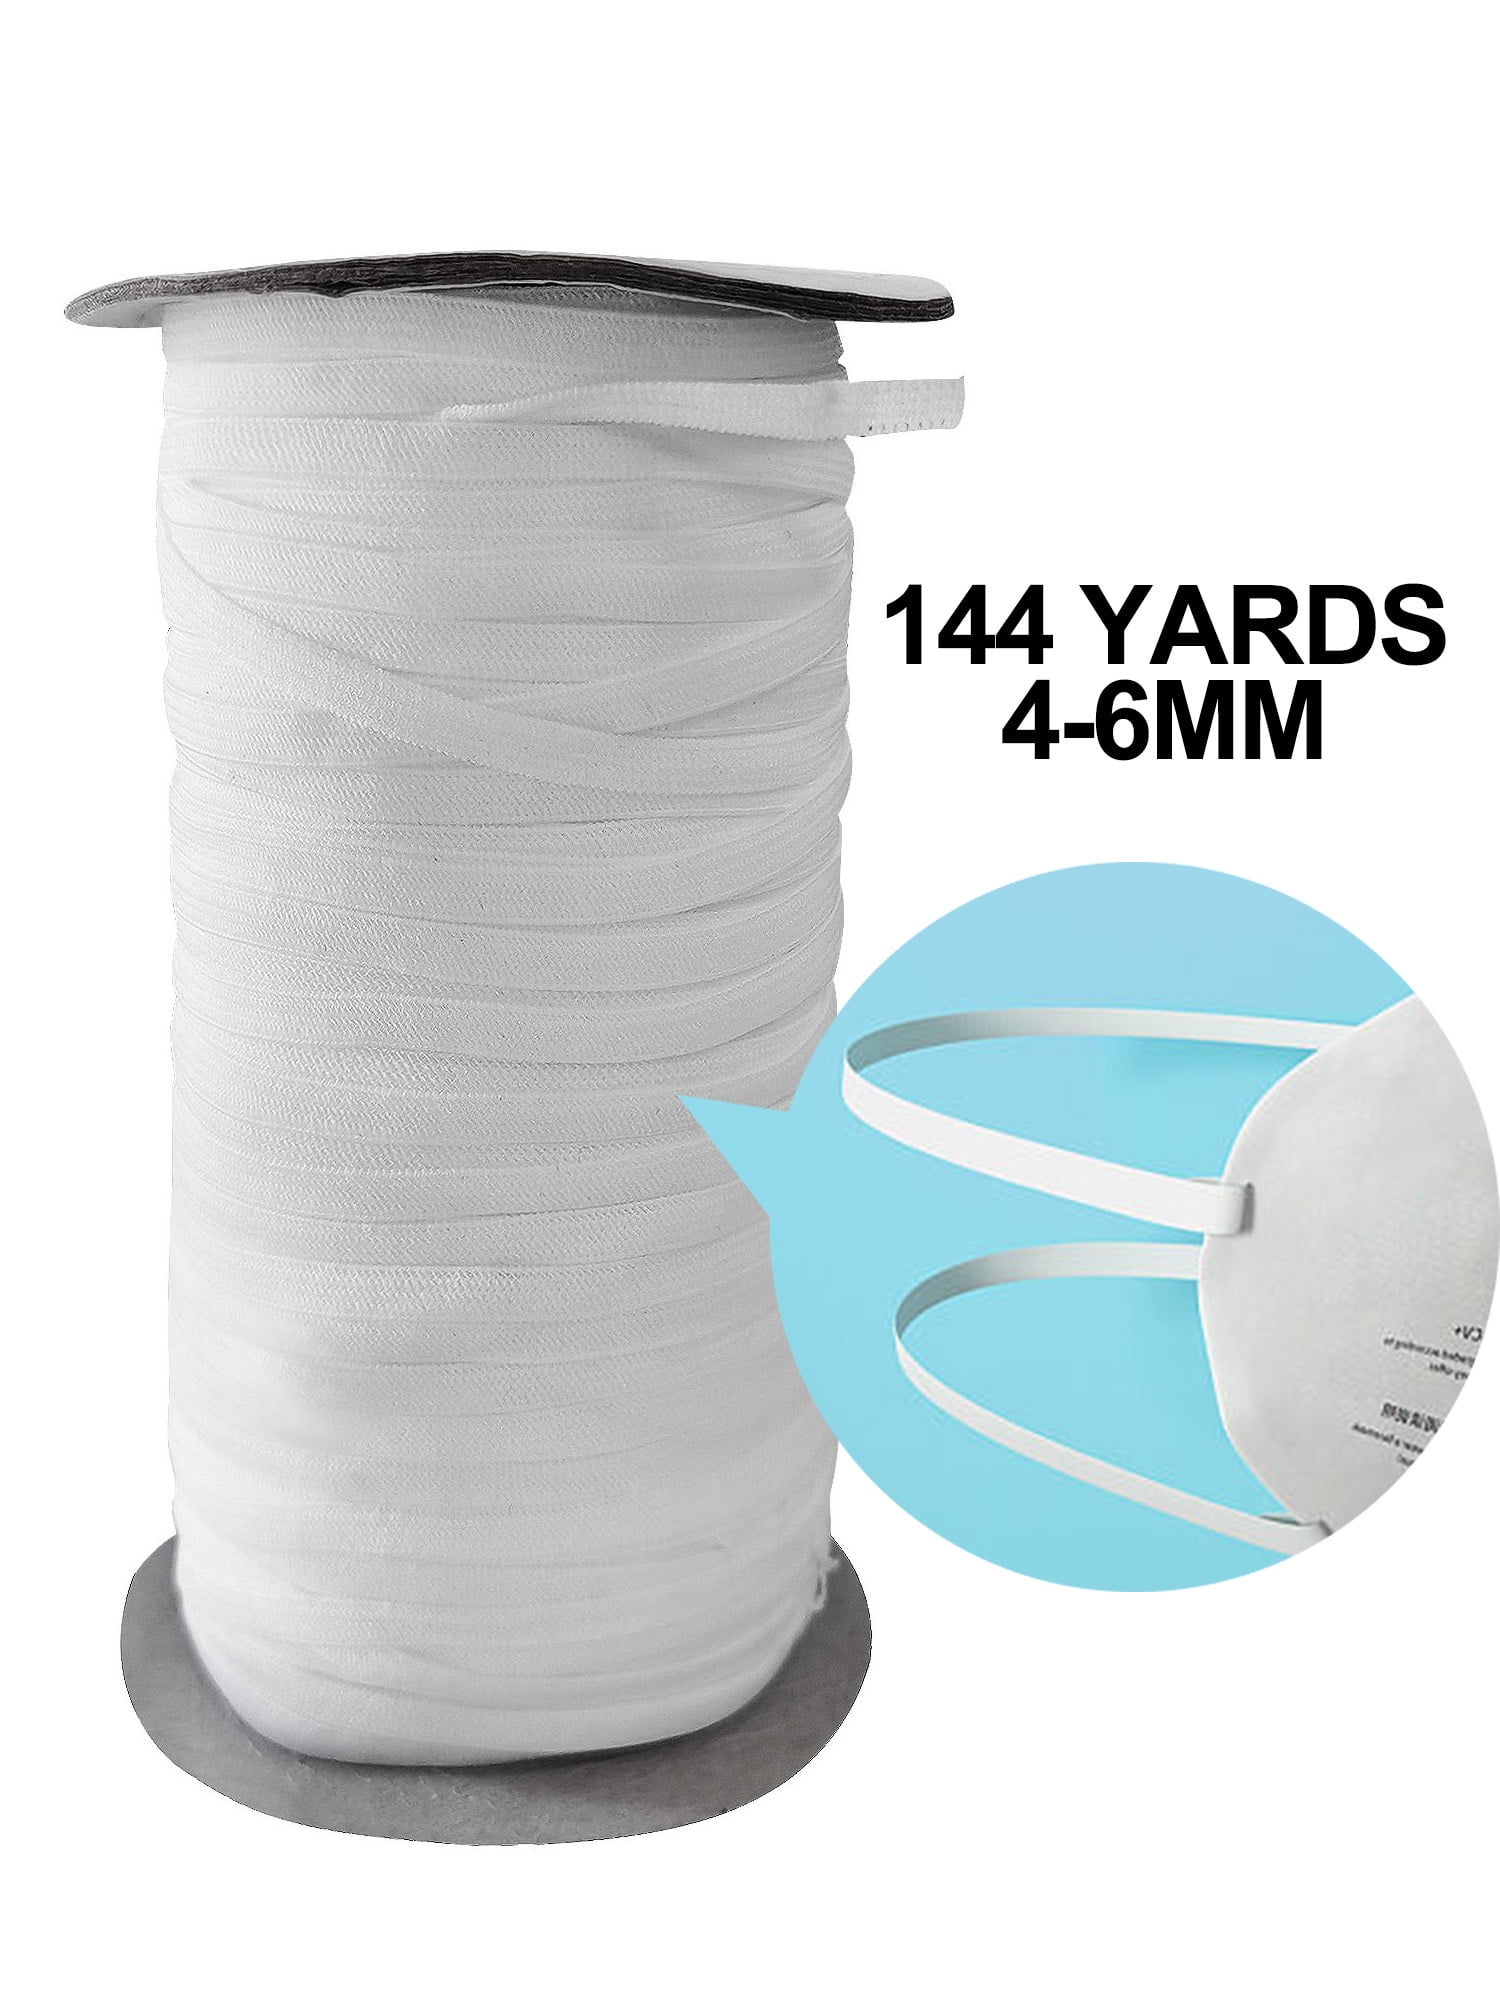 3mm, 50m/ White Round Masks Elastic Band DIY String for Masks Sewing Elastic Rope Stretchy Band for Knitting Arts & Craft Accessories 